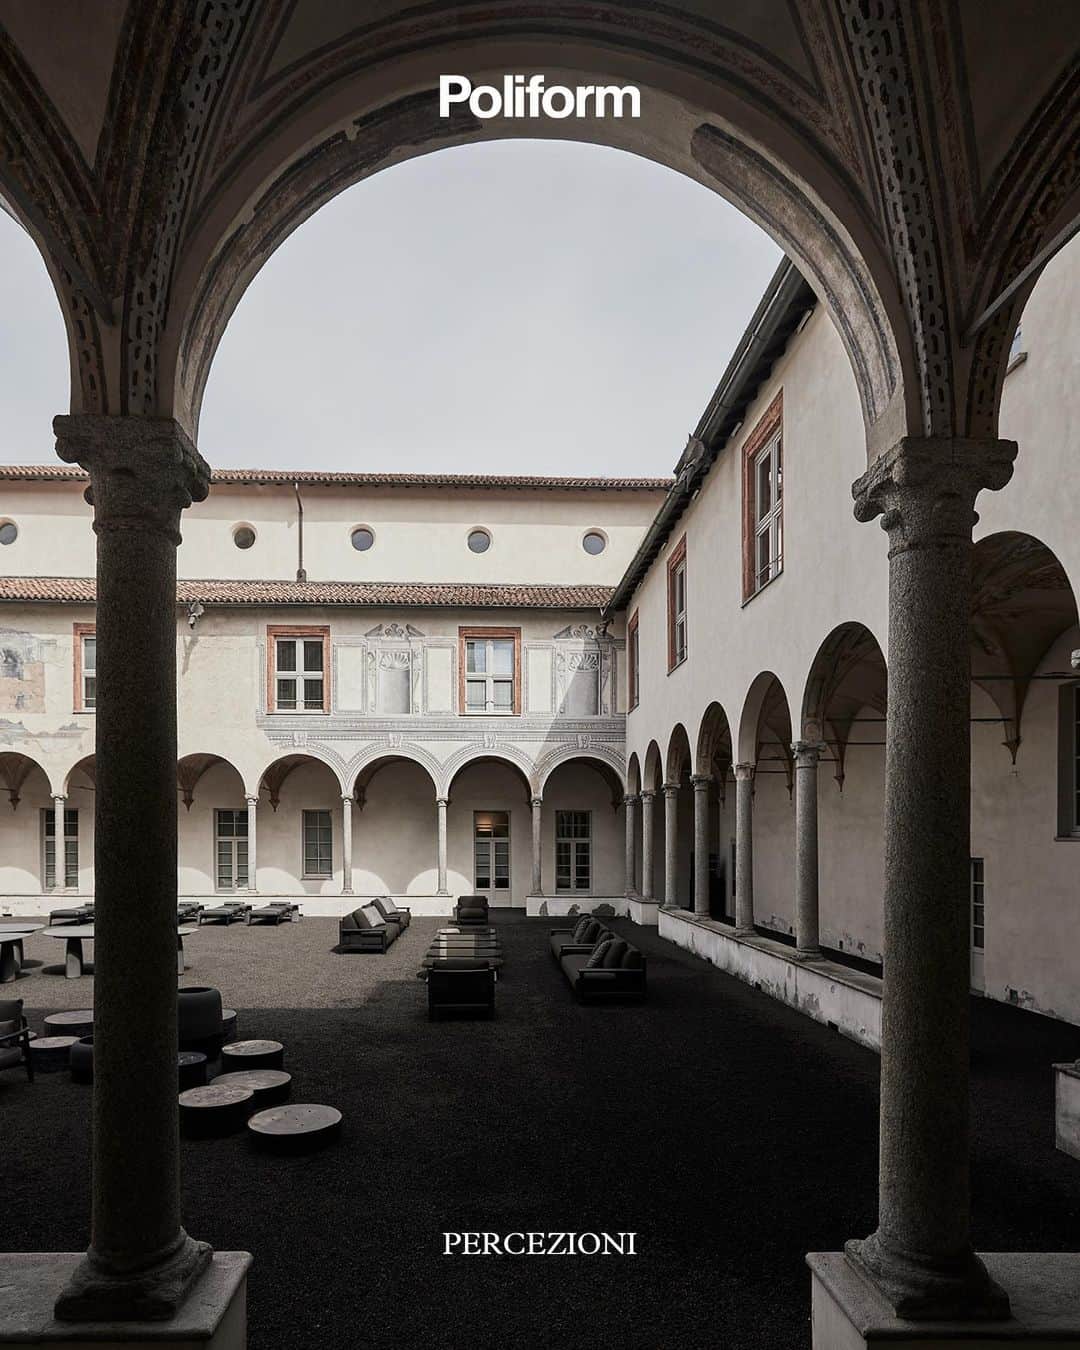 Poliform|Varennaのインスタグラム：「Percezioni: a multi-sensory installation created to present a preview of the new outdoor collection. In the cloisters of San Simpliciano in Milan, fifteenth-century architecture, volcanic lapilli surfaces and the enchanting notes of Perennial Fantas, a musical work composed for the event by @cat_barbieri, come together. The result is a beautiful, calming place in which to pause and allow your senses to take everything in. The exhibition is open to public during Milan Design week until Saturday. Book your visit via link in bio or IG story.  Percezioni Chiostri di San Simpliciano, Piazza Paolo VI, Milan 18 - 22 April 2023」